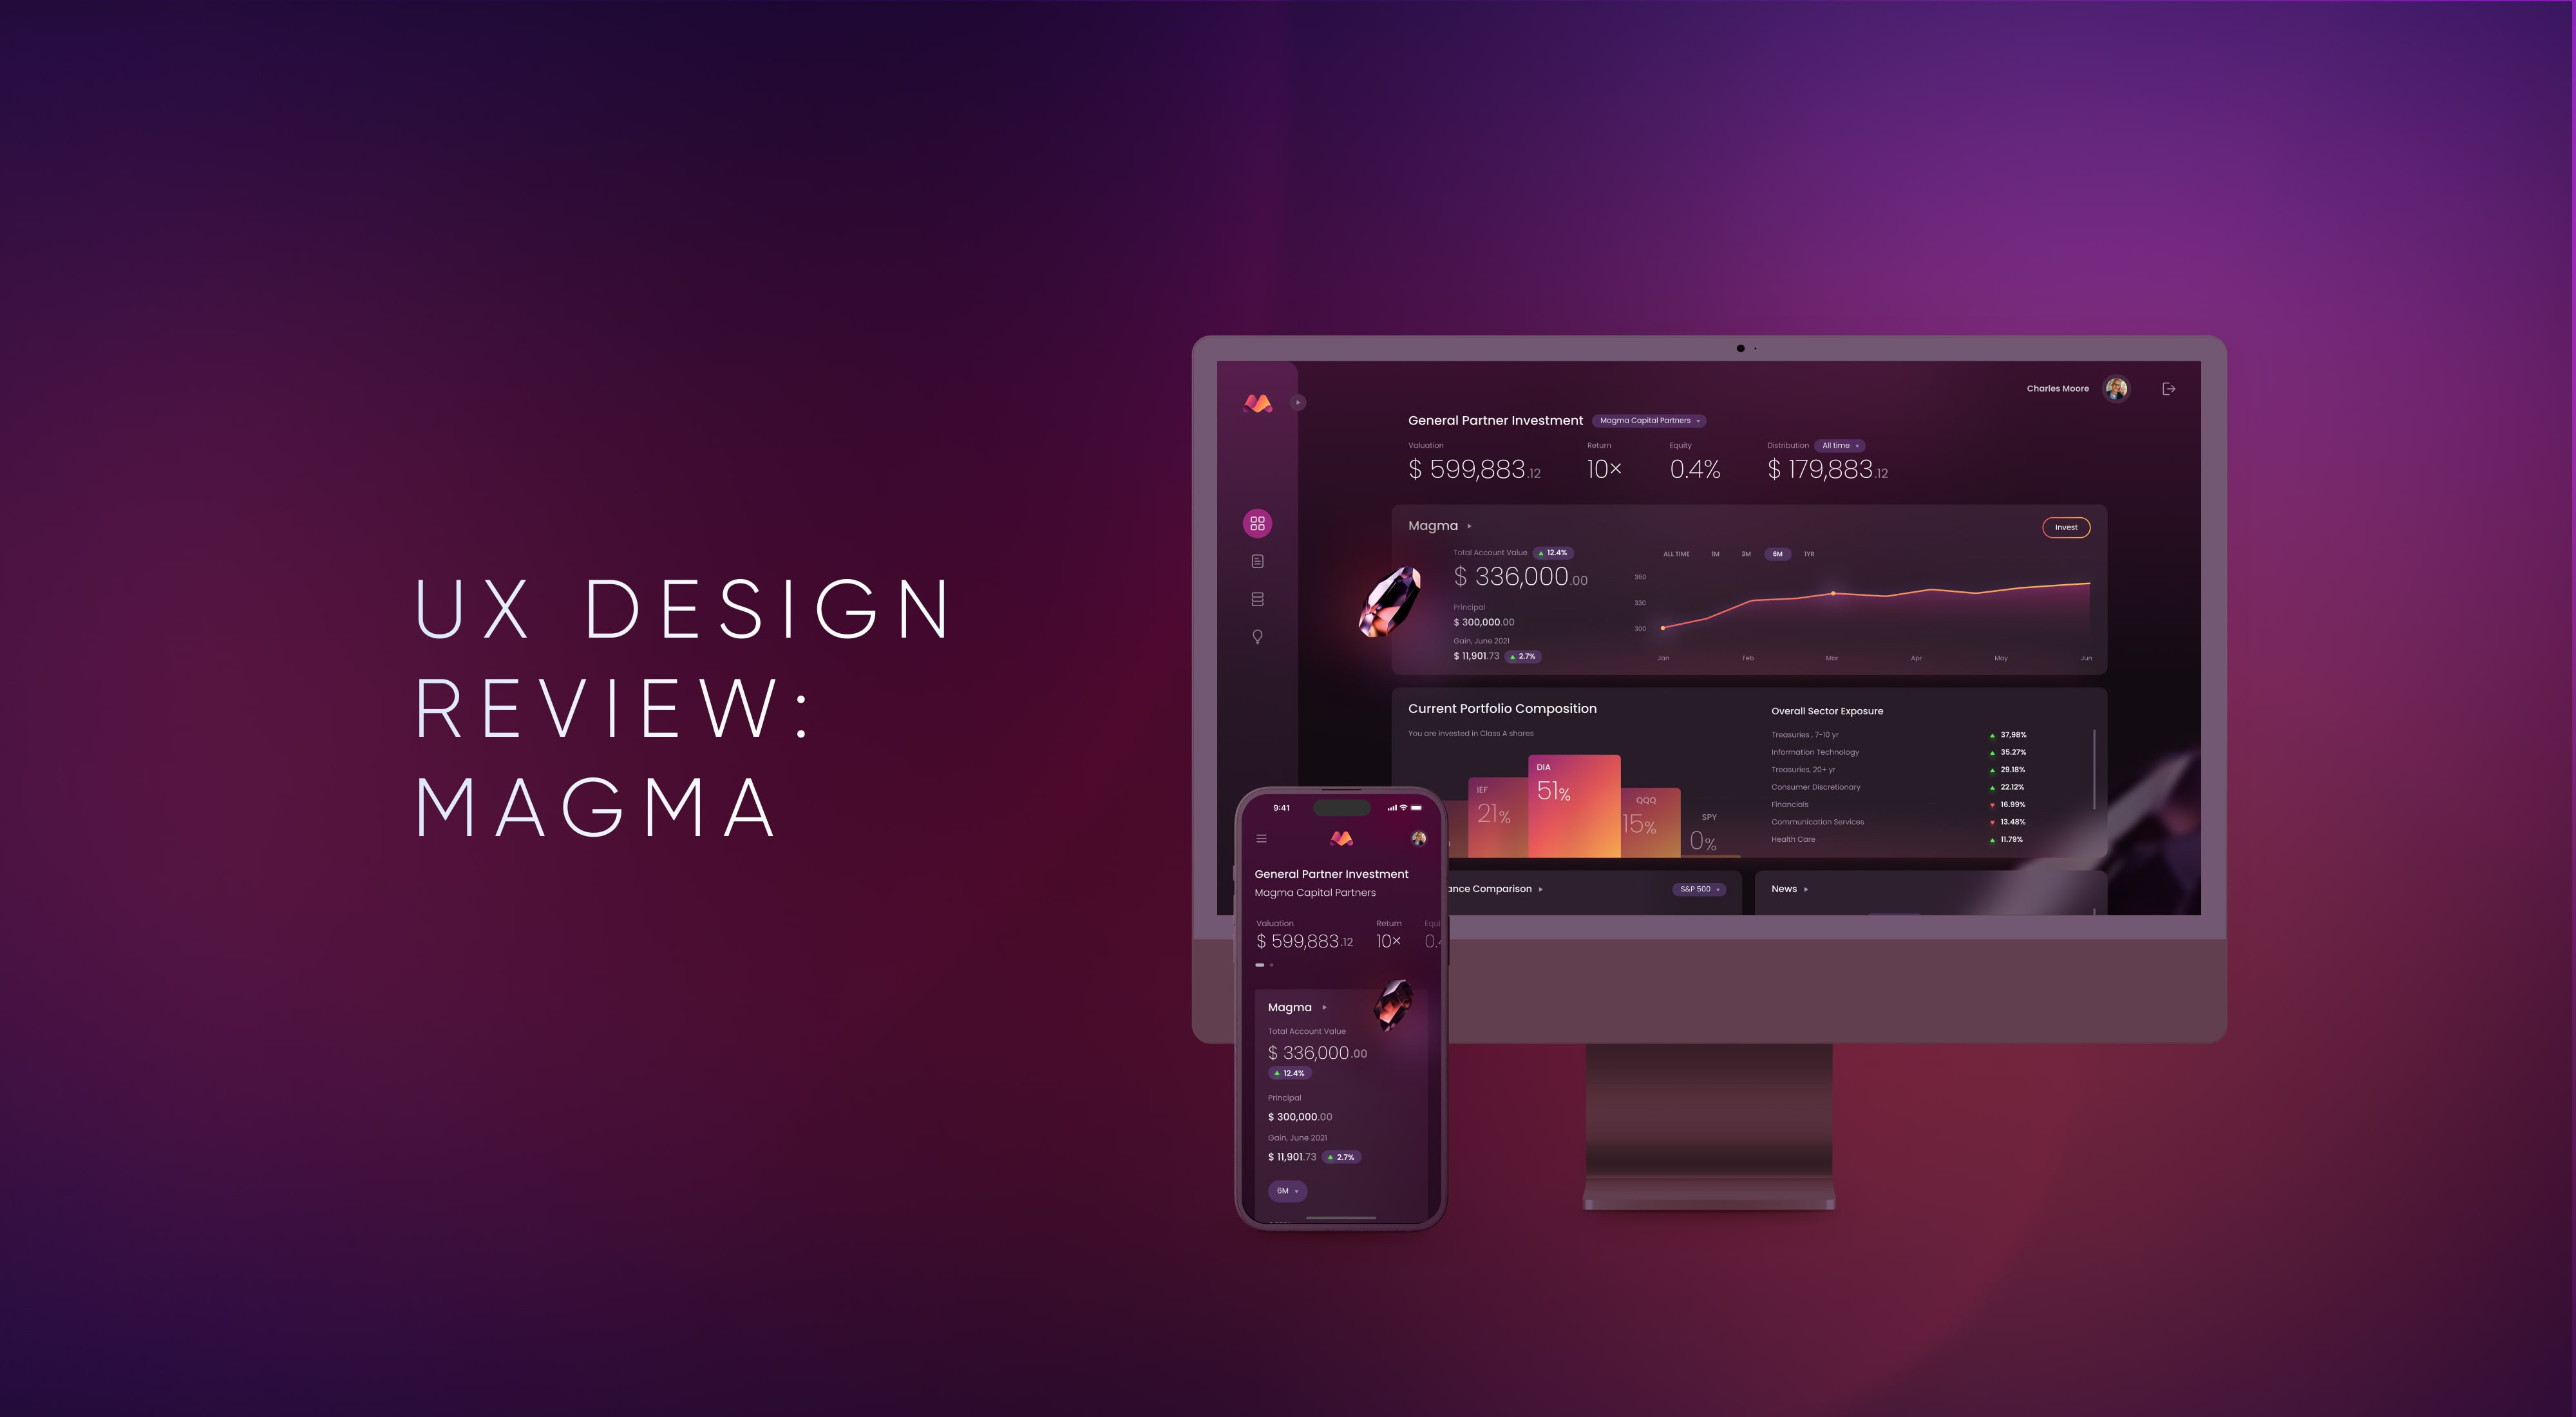 UX Design Review: What Magma Said About UXDA